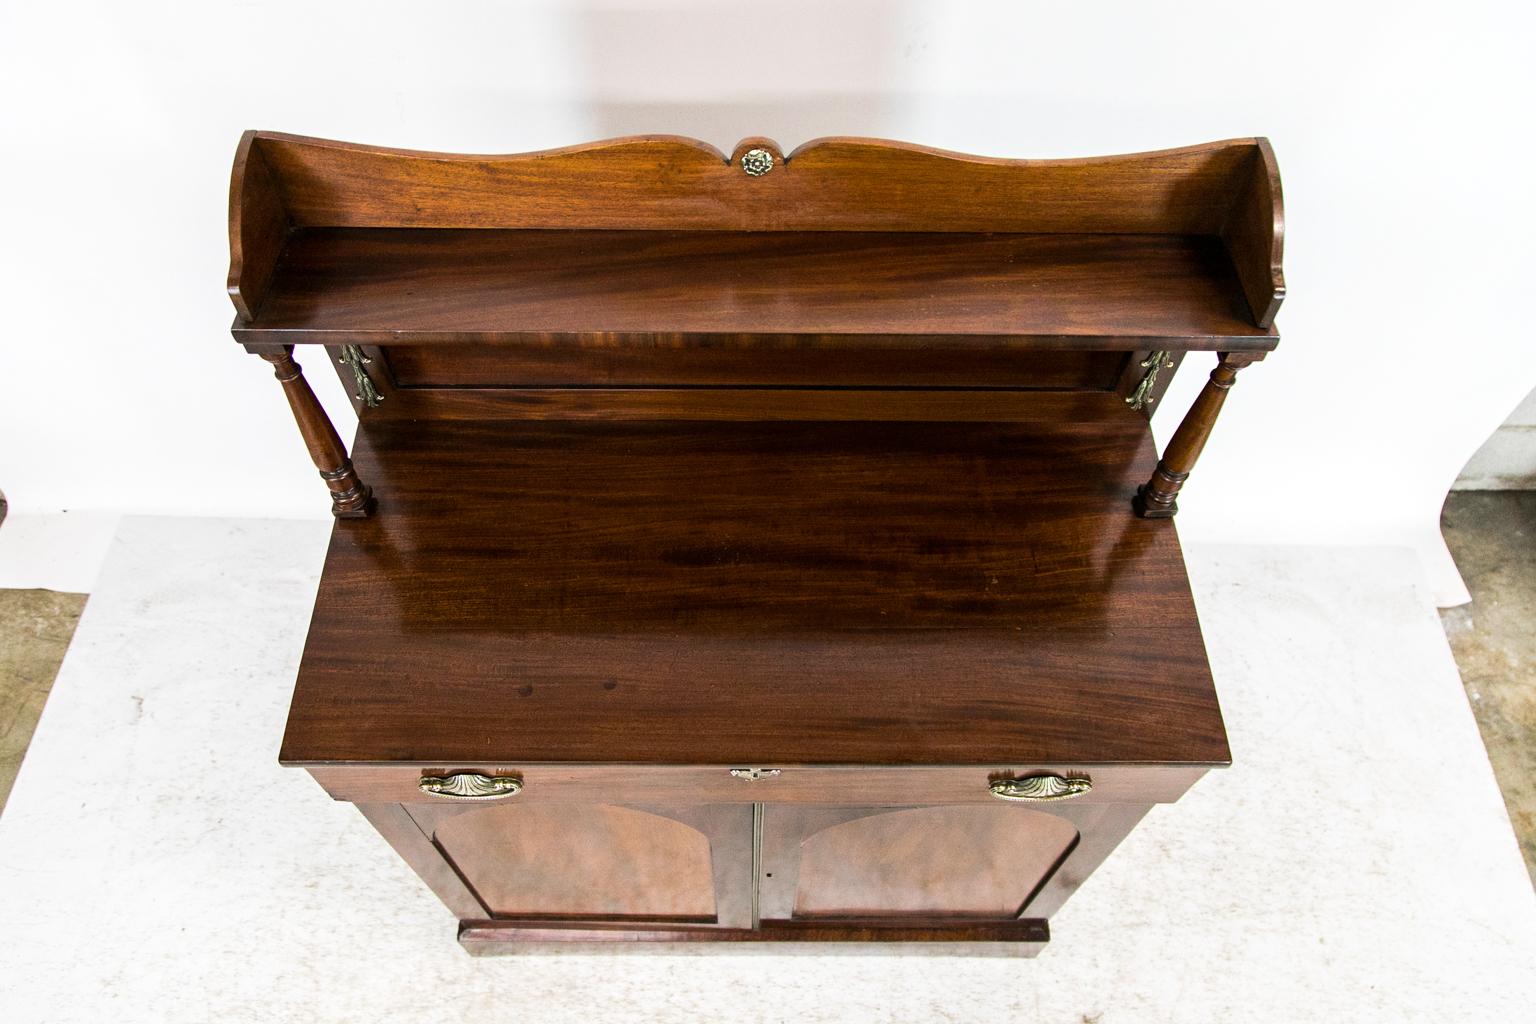 This buffet/server has a rear gallery with a shaped crest. There is a five-inch-deep shelf supported by turned columns. The back has a recessed panel. There is a drawer above two lower doors that have recessed arched panels and the original reeded